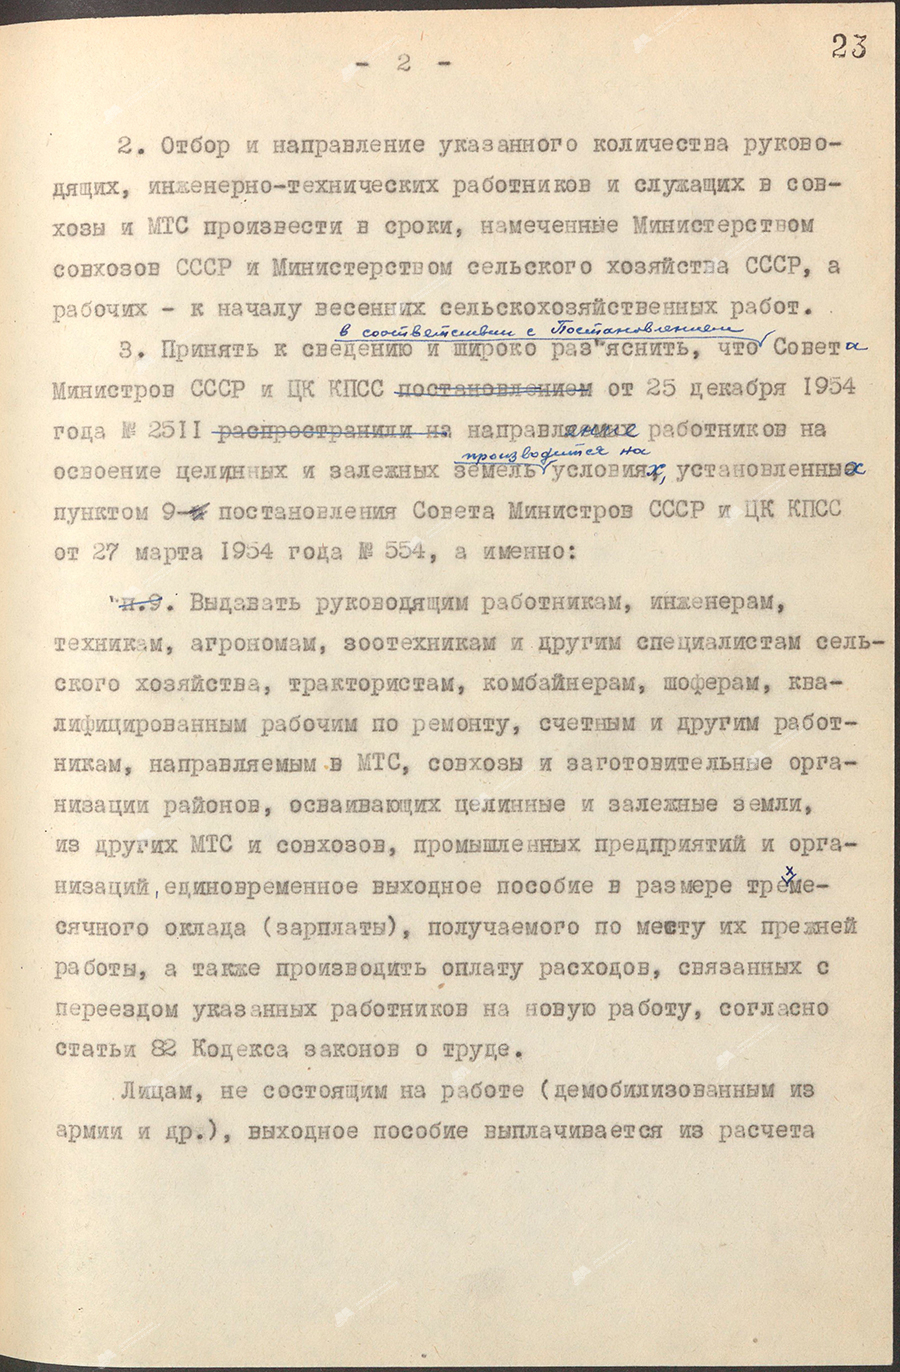 Resolution No. 5 of the Council of Ministers of the BSSR and the Central Committee of the Communist Party of Belarus «On the selection and assignment of workers, engineering and technical workers and employees to work in MTS and state farms in the areas of development of virgin and fallow lands of the RSFSR and Kazakhstan»-с. 1